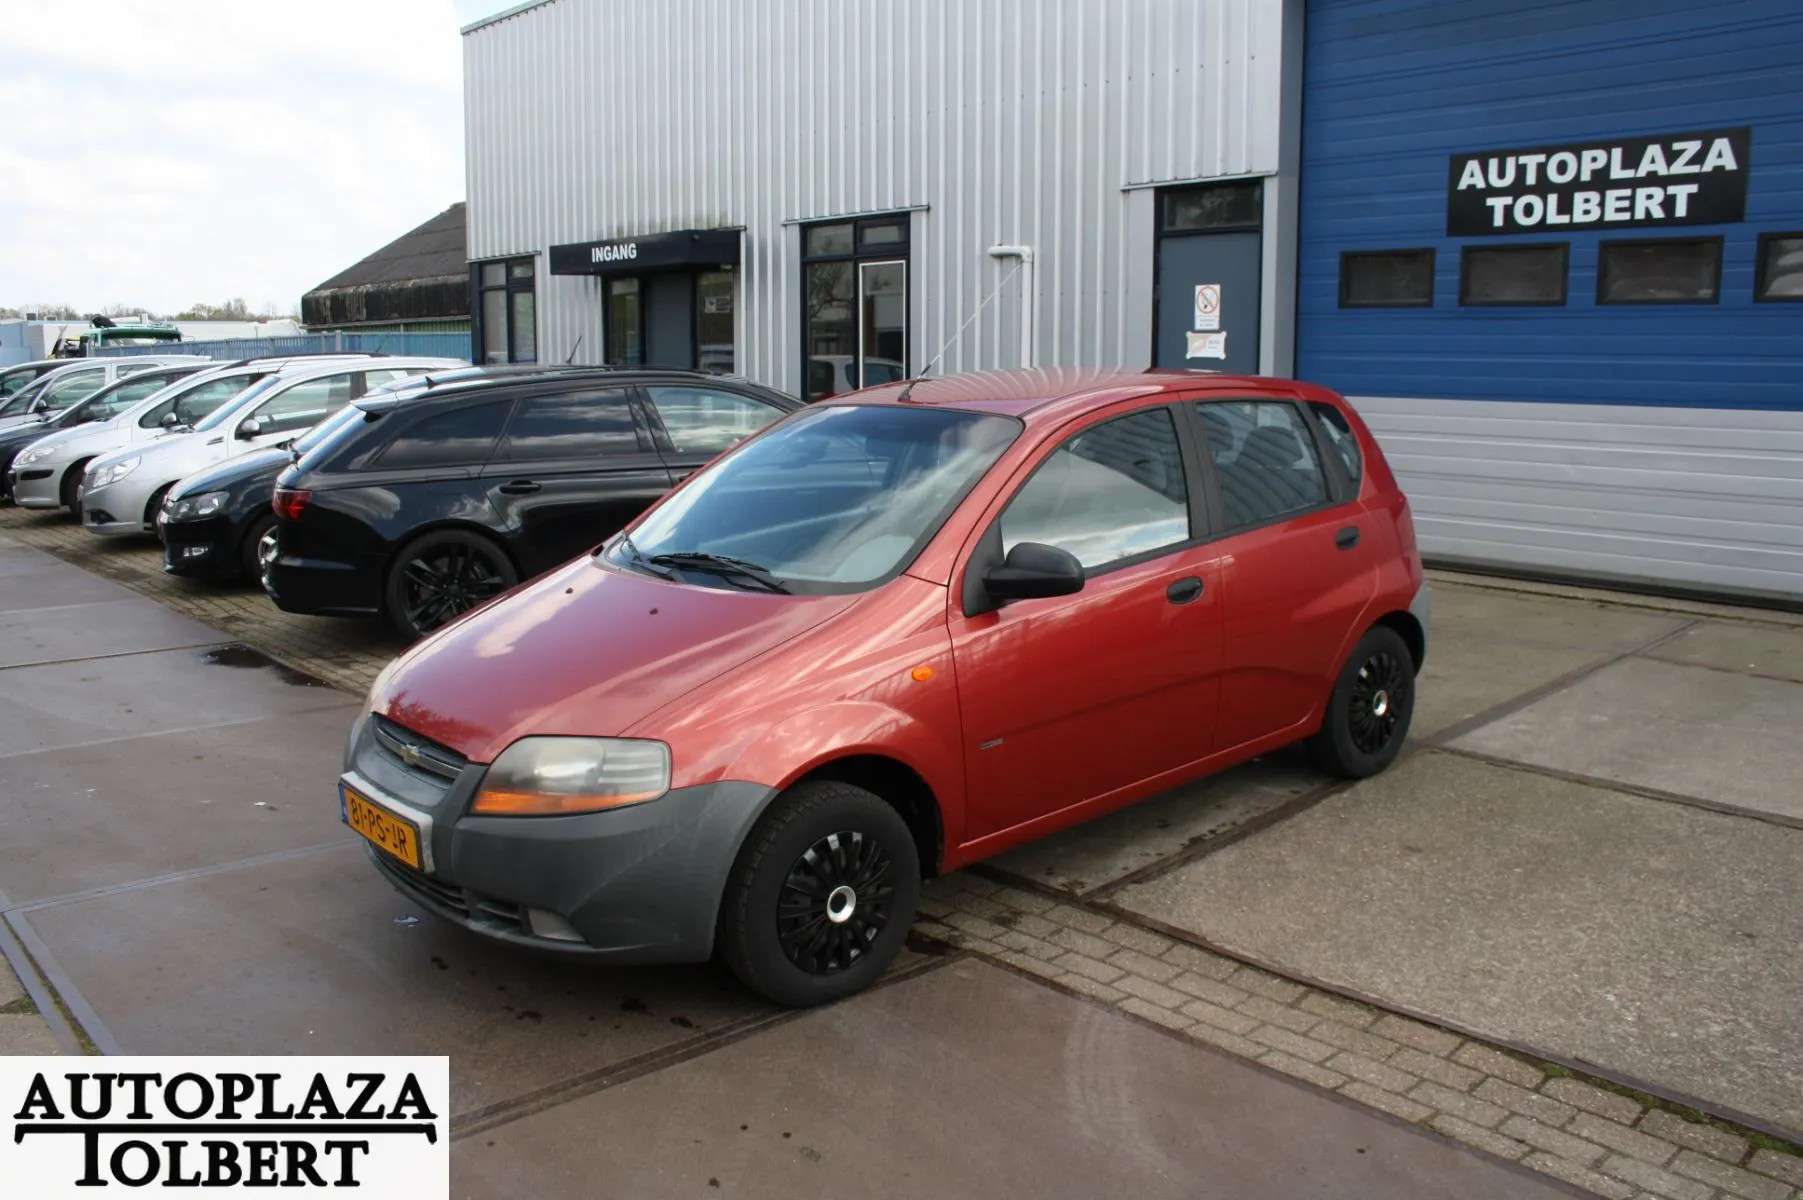 Daewoo Kalos Compact in Red used in TOLBERT for € 999.-